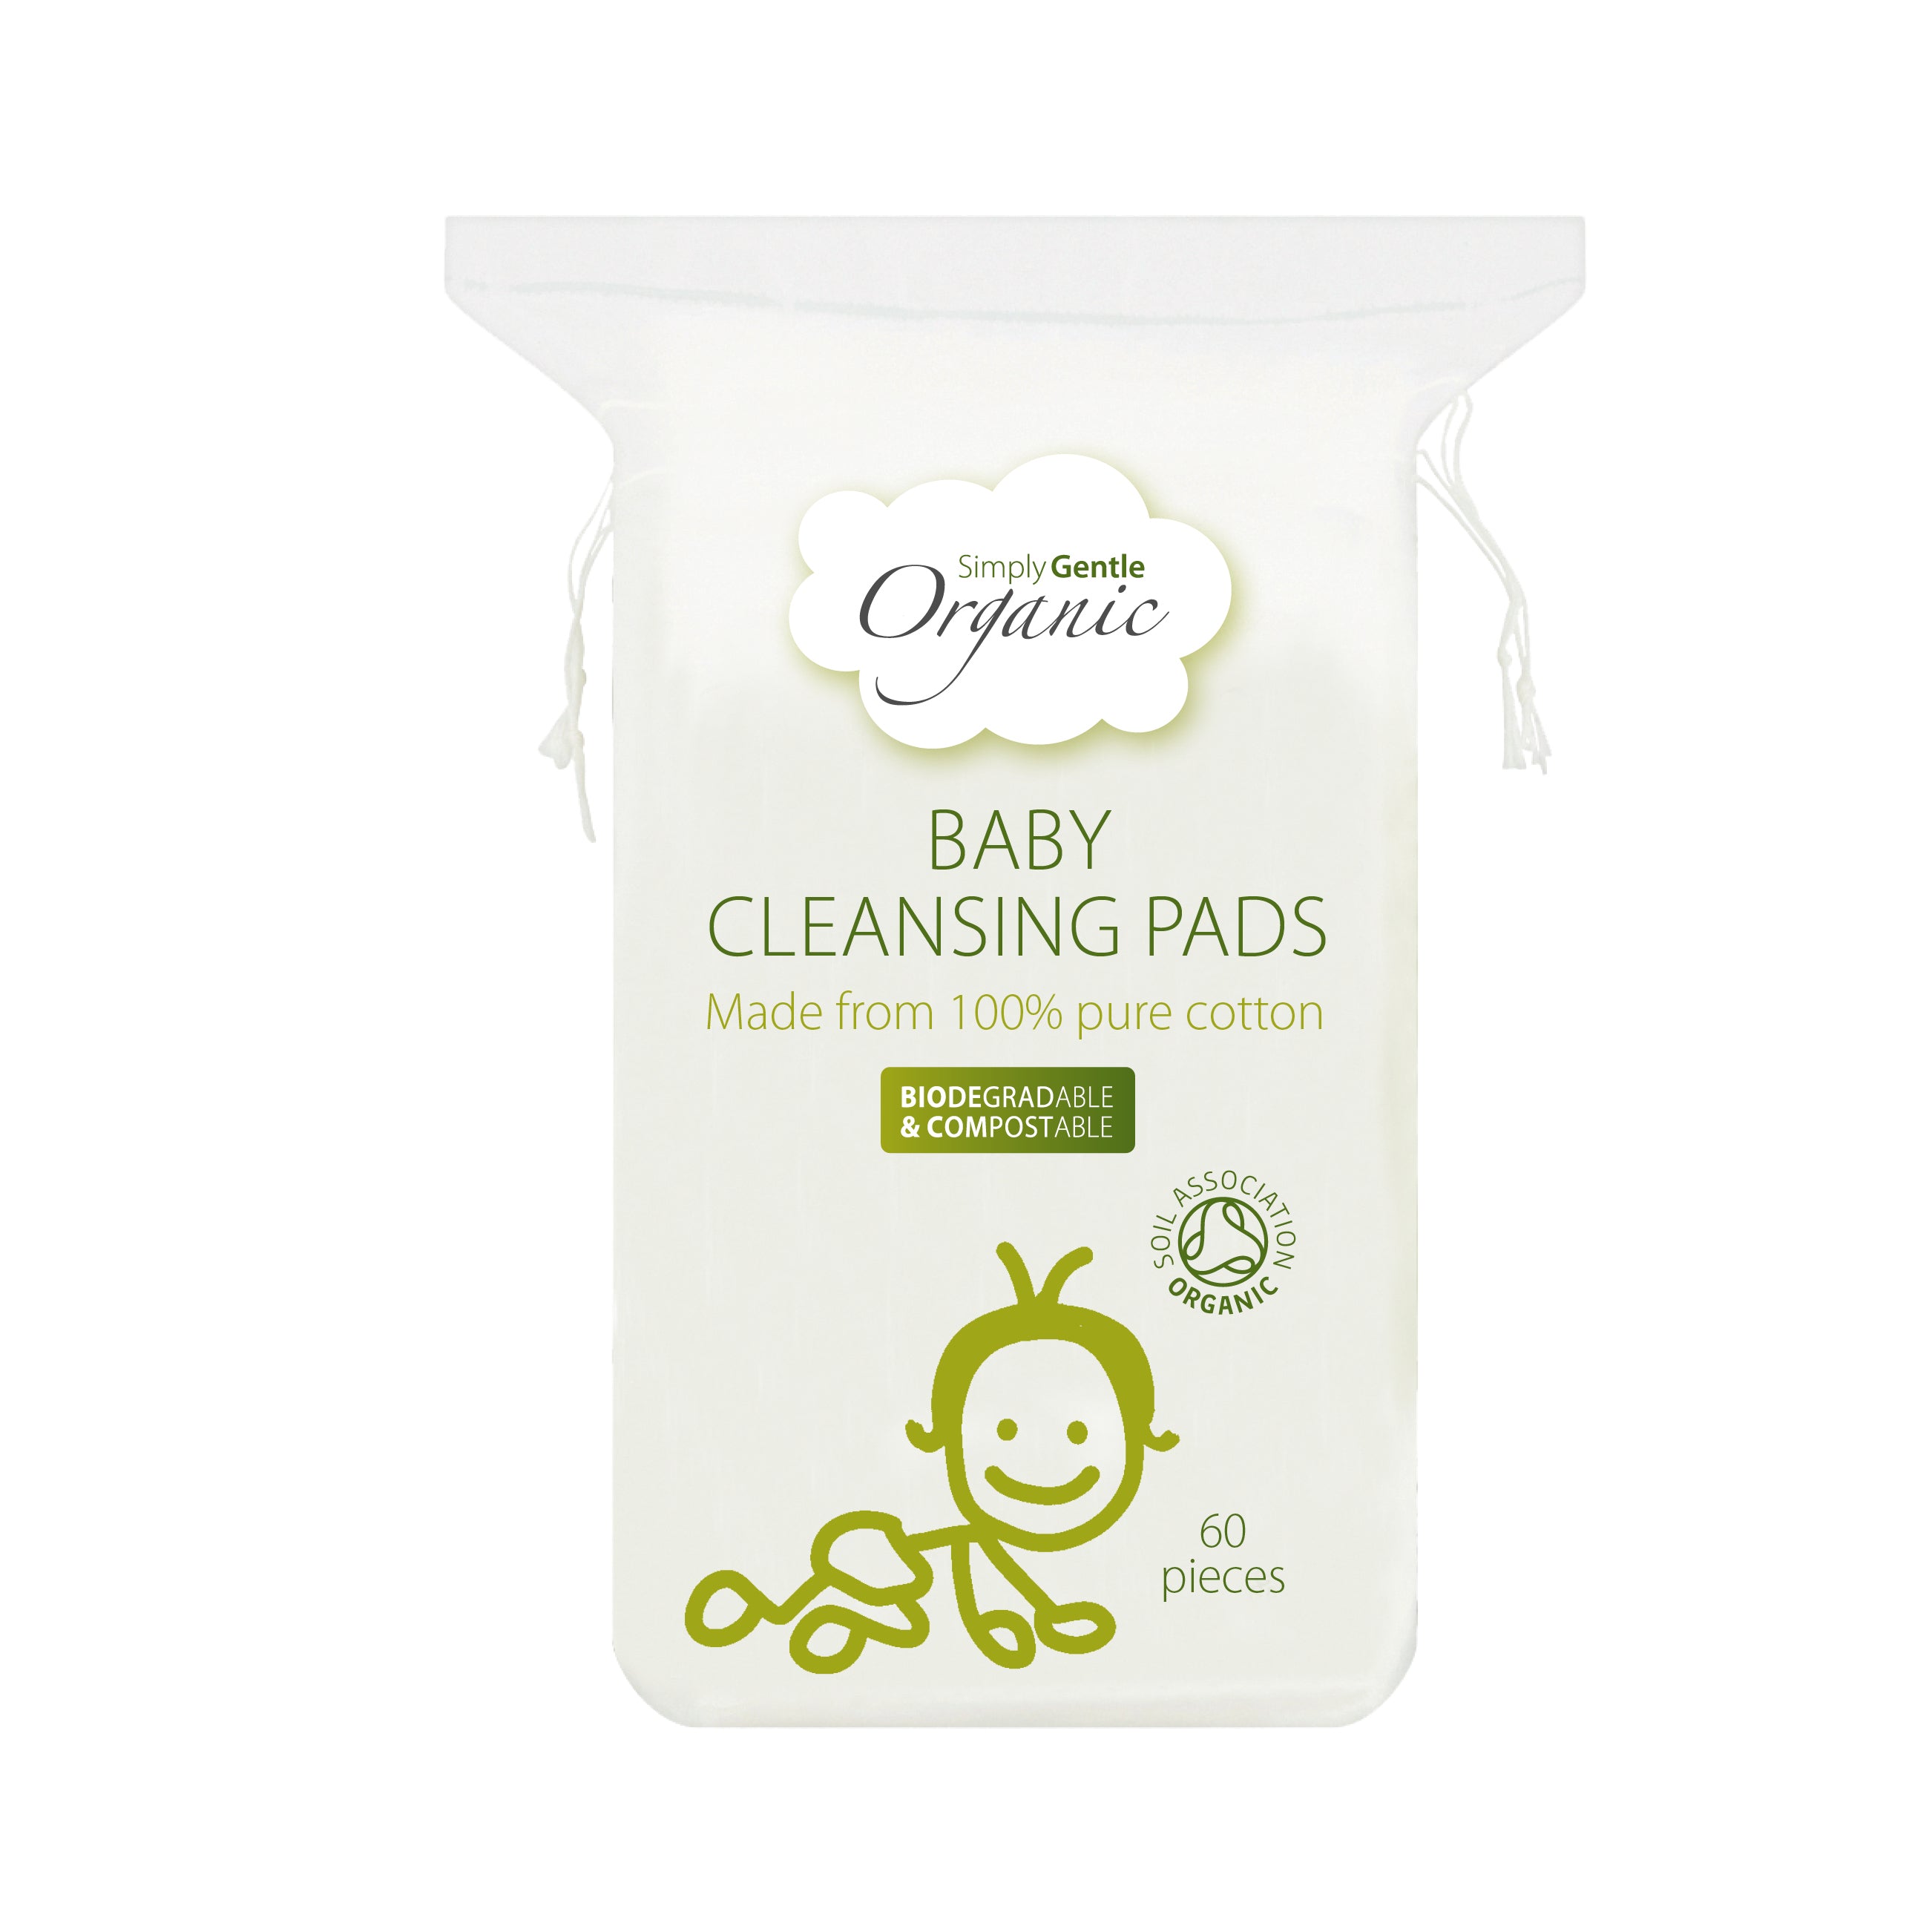 Made from 100% pure organic cotton our Baby Cleansing Pads attract dirt and make-up like a magnet while having a soft and gentle texture to prevent irritation. Perfect for anyone with sensitive skin or just looking to be more eco-friendly and sustainable.  